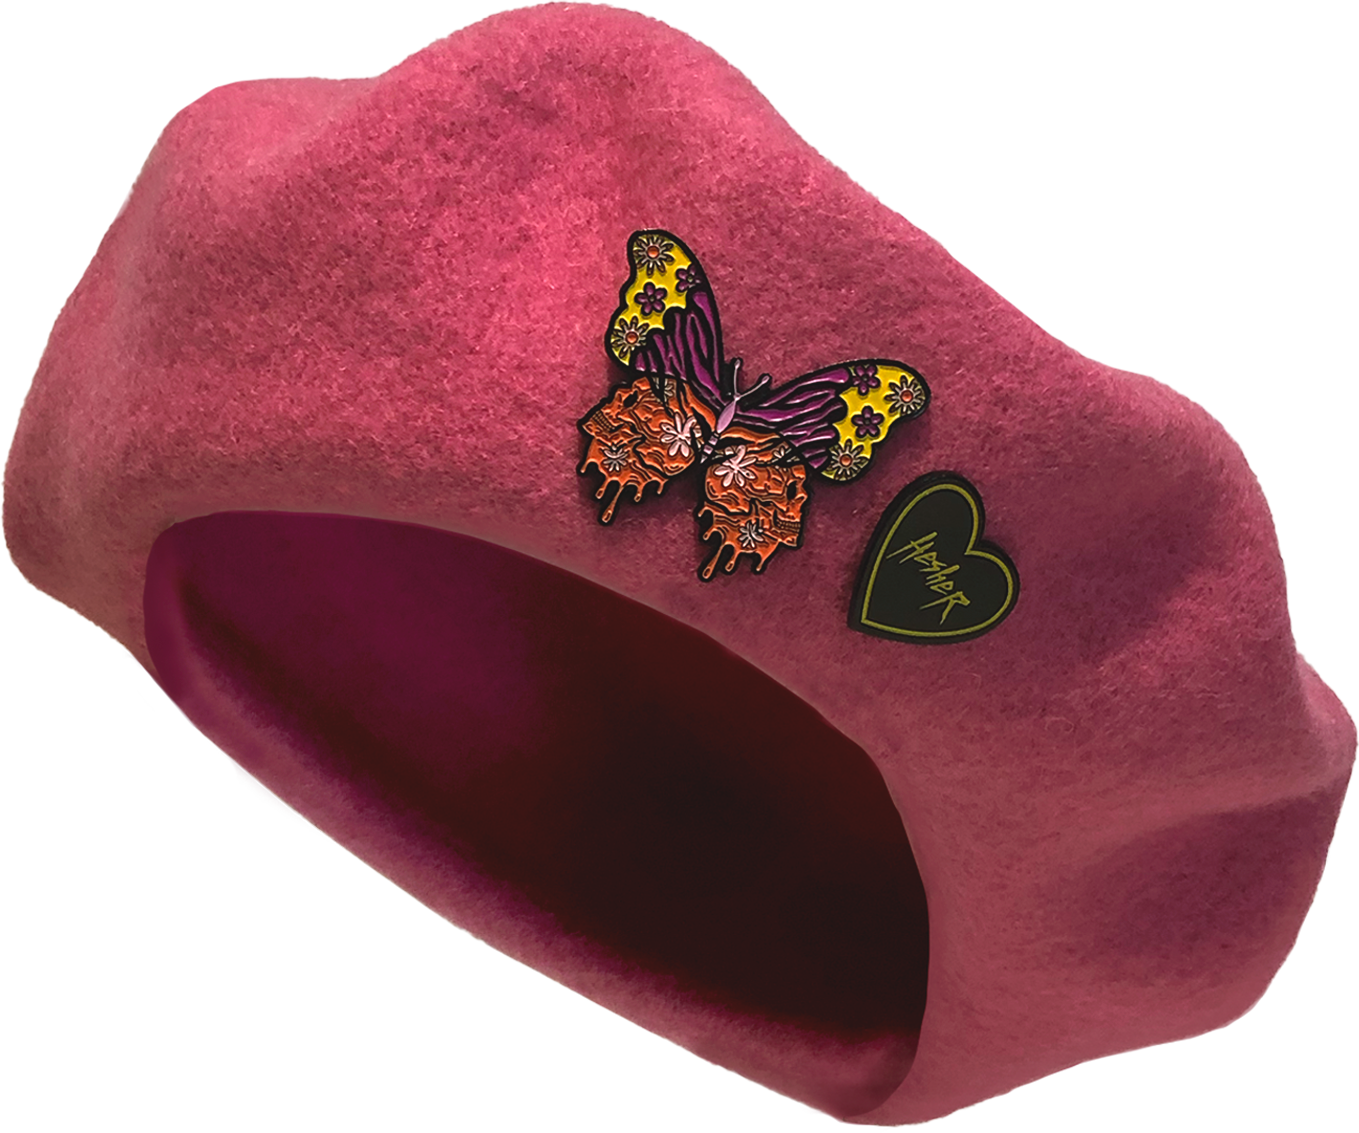 pink wool beret with colorful butterfly metal pin and black and yellow Hesher heart shaped metal pin